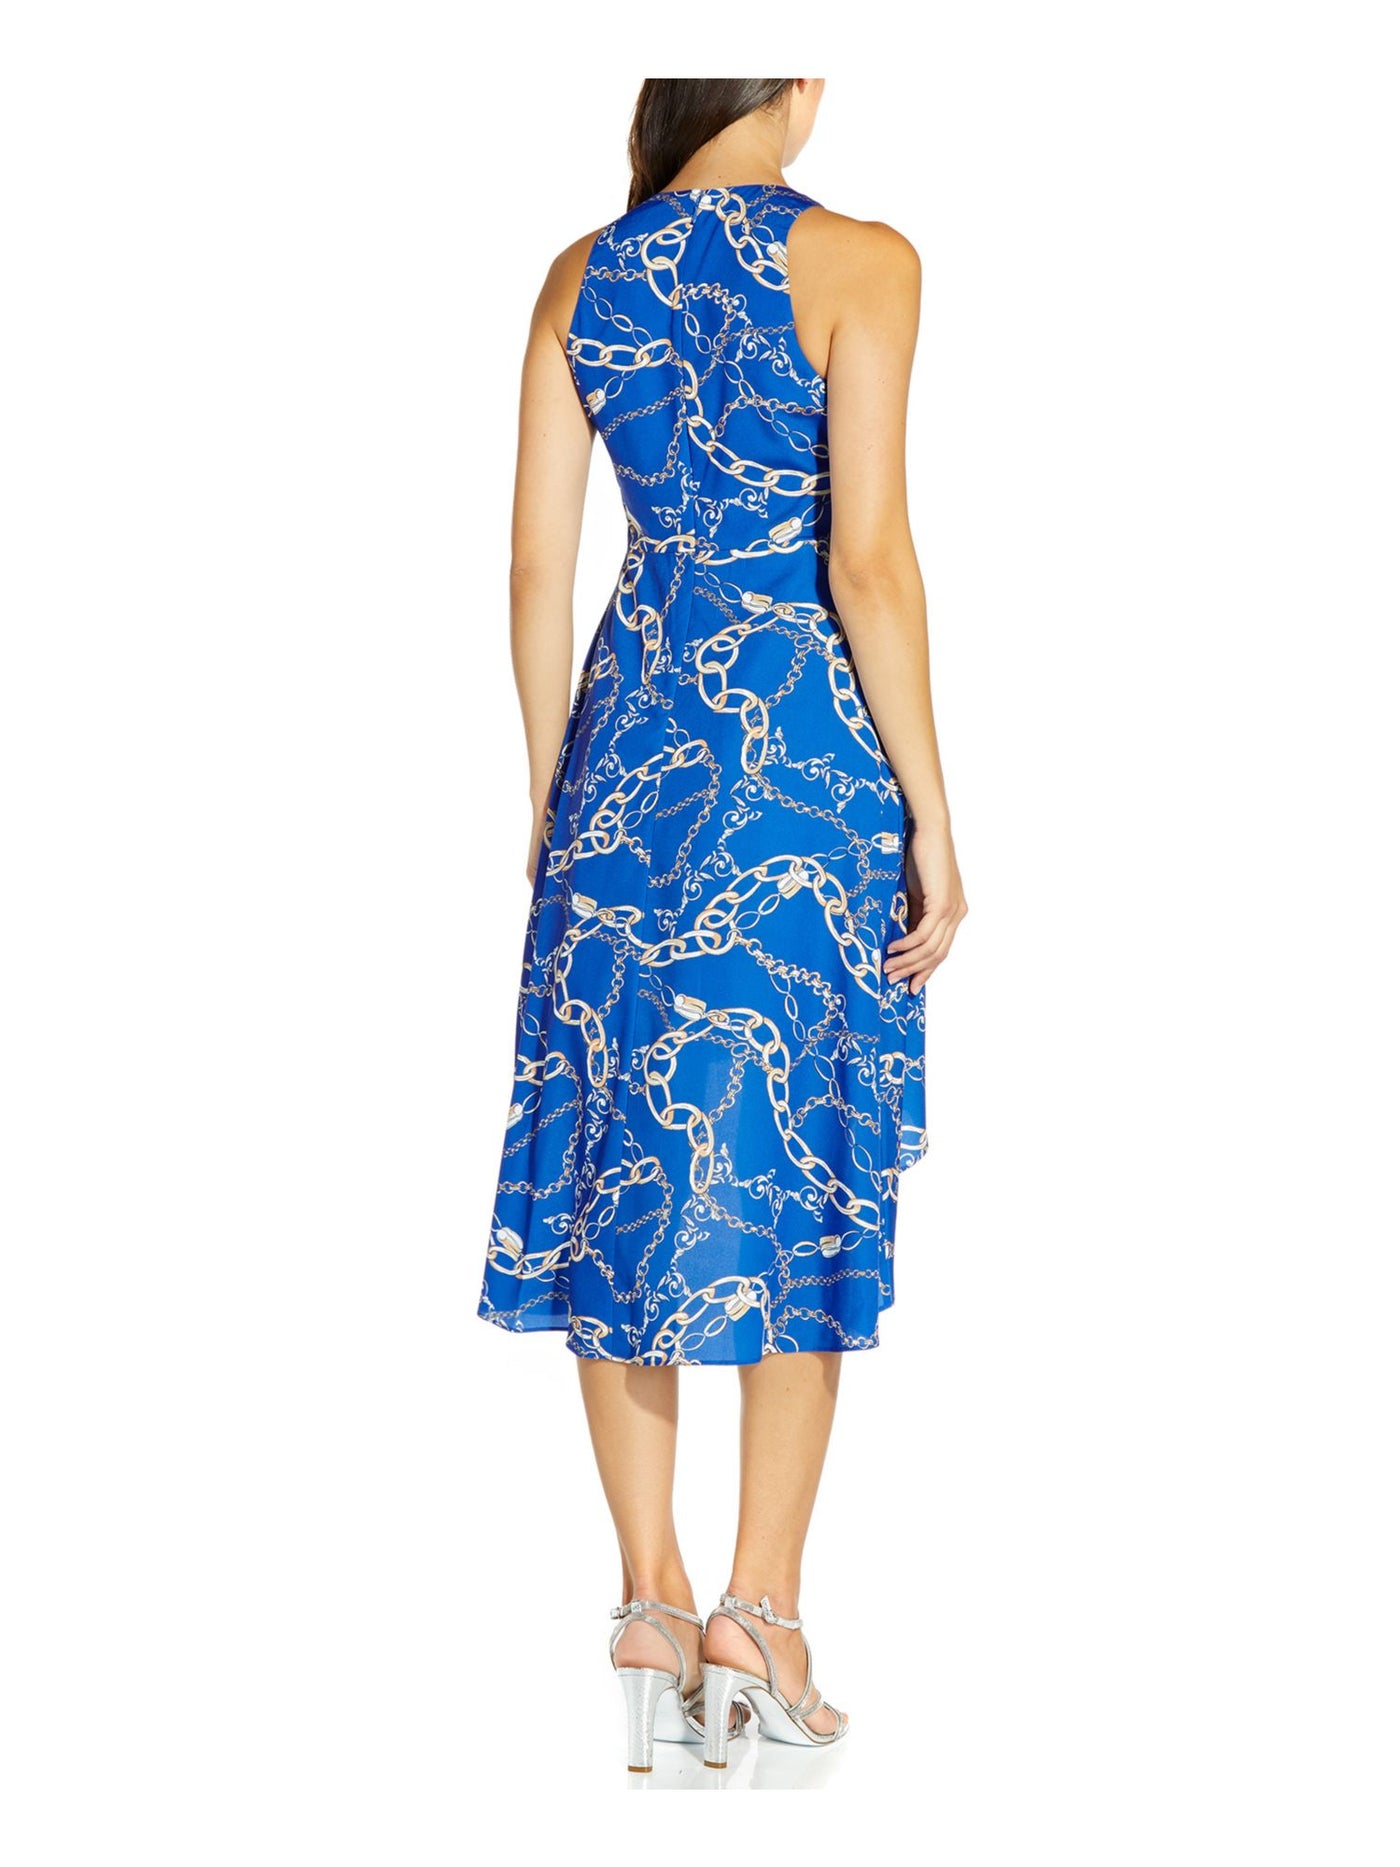 ADRIANNA PAPELL Womens Blue Zippered Hi-low Printed Sleeveless Crew Neck Below The Knee Party Fit + Flare Dress 6